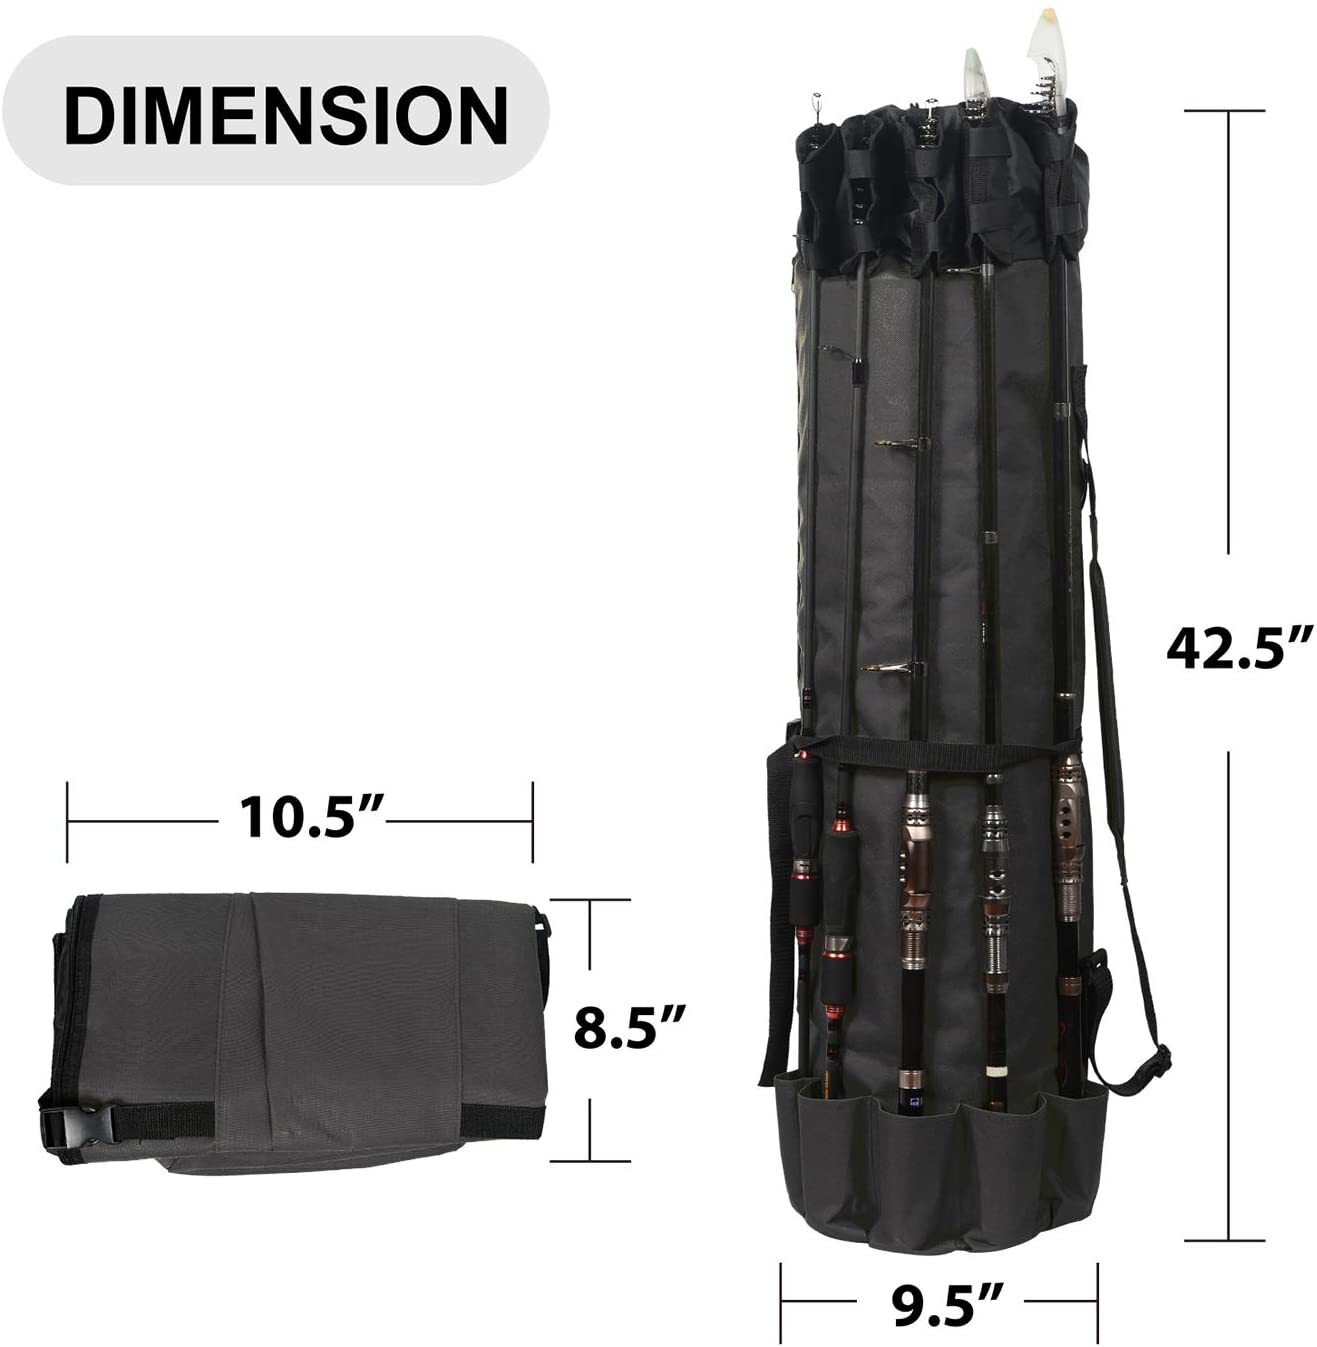 LEADALLWAY Portable Fishing Rod Bag, Durable Folding Oxford Fabric Fishing  Tackle Carry Case Bag Multifunction Large Capacity Waterproof Fishing Rod  Case Holds 5 Poles